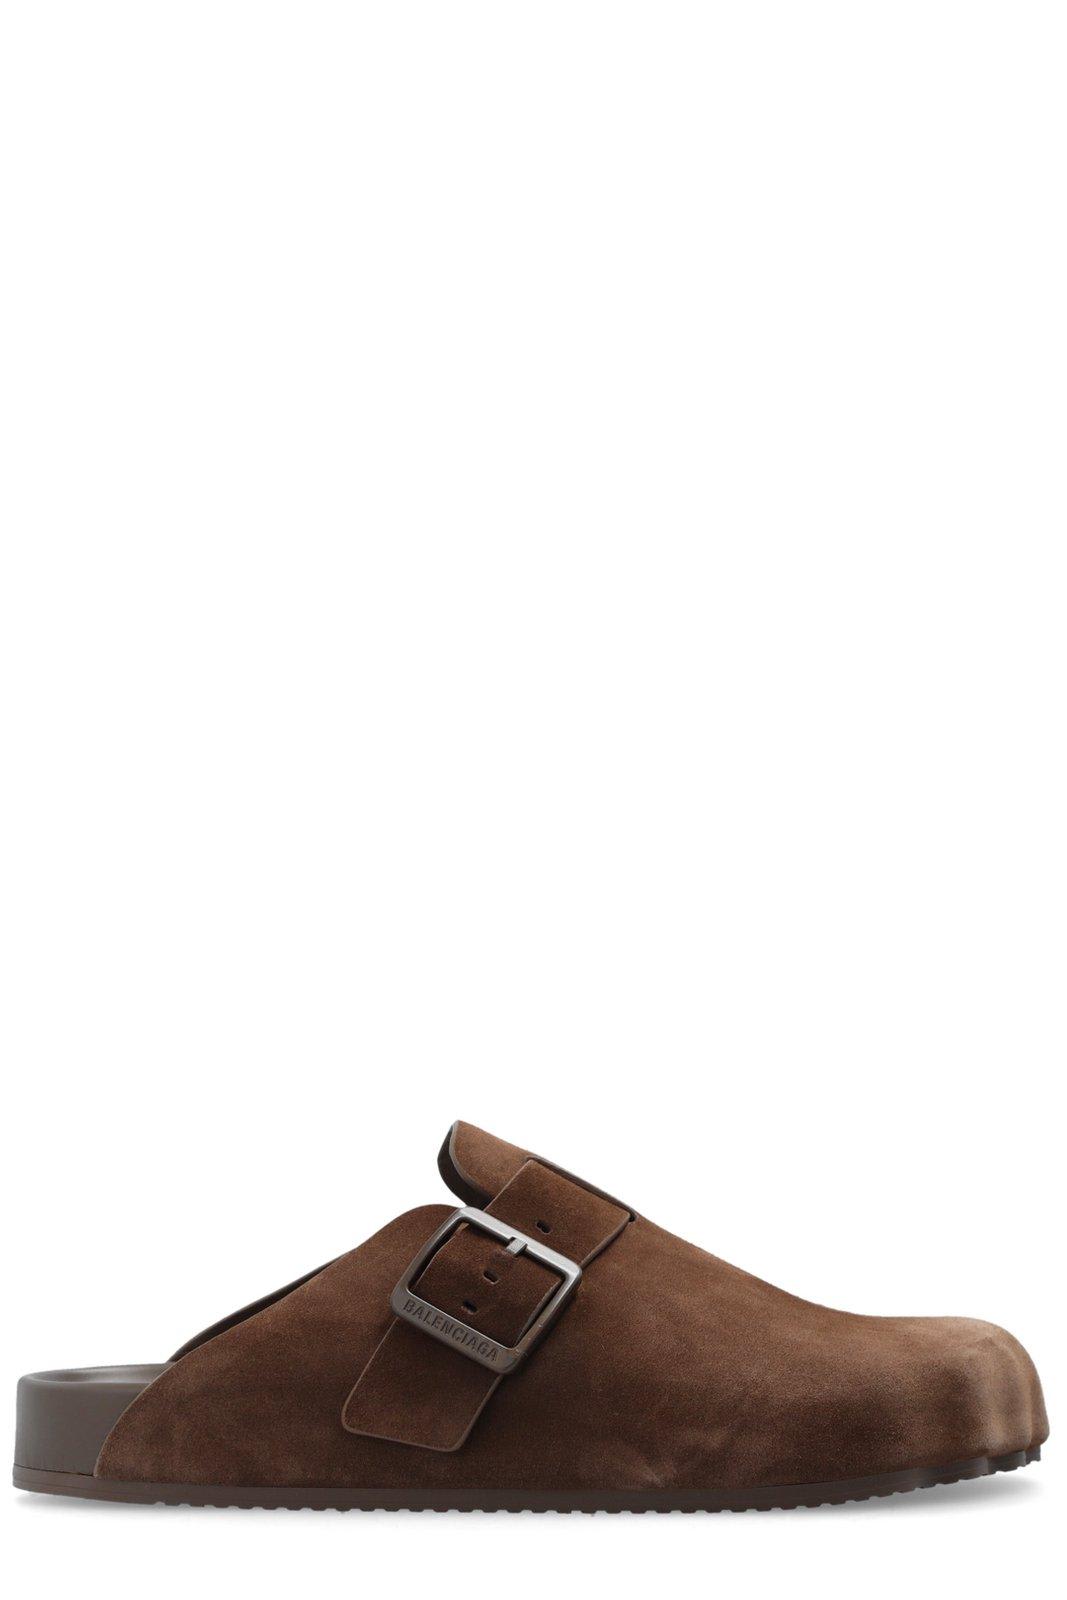 Balenciaga Sunday Buckled Mules In Brown